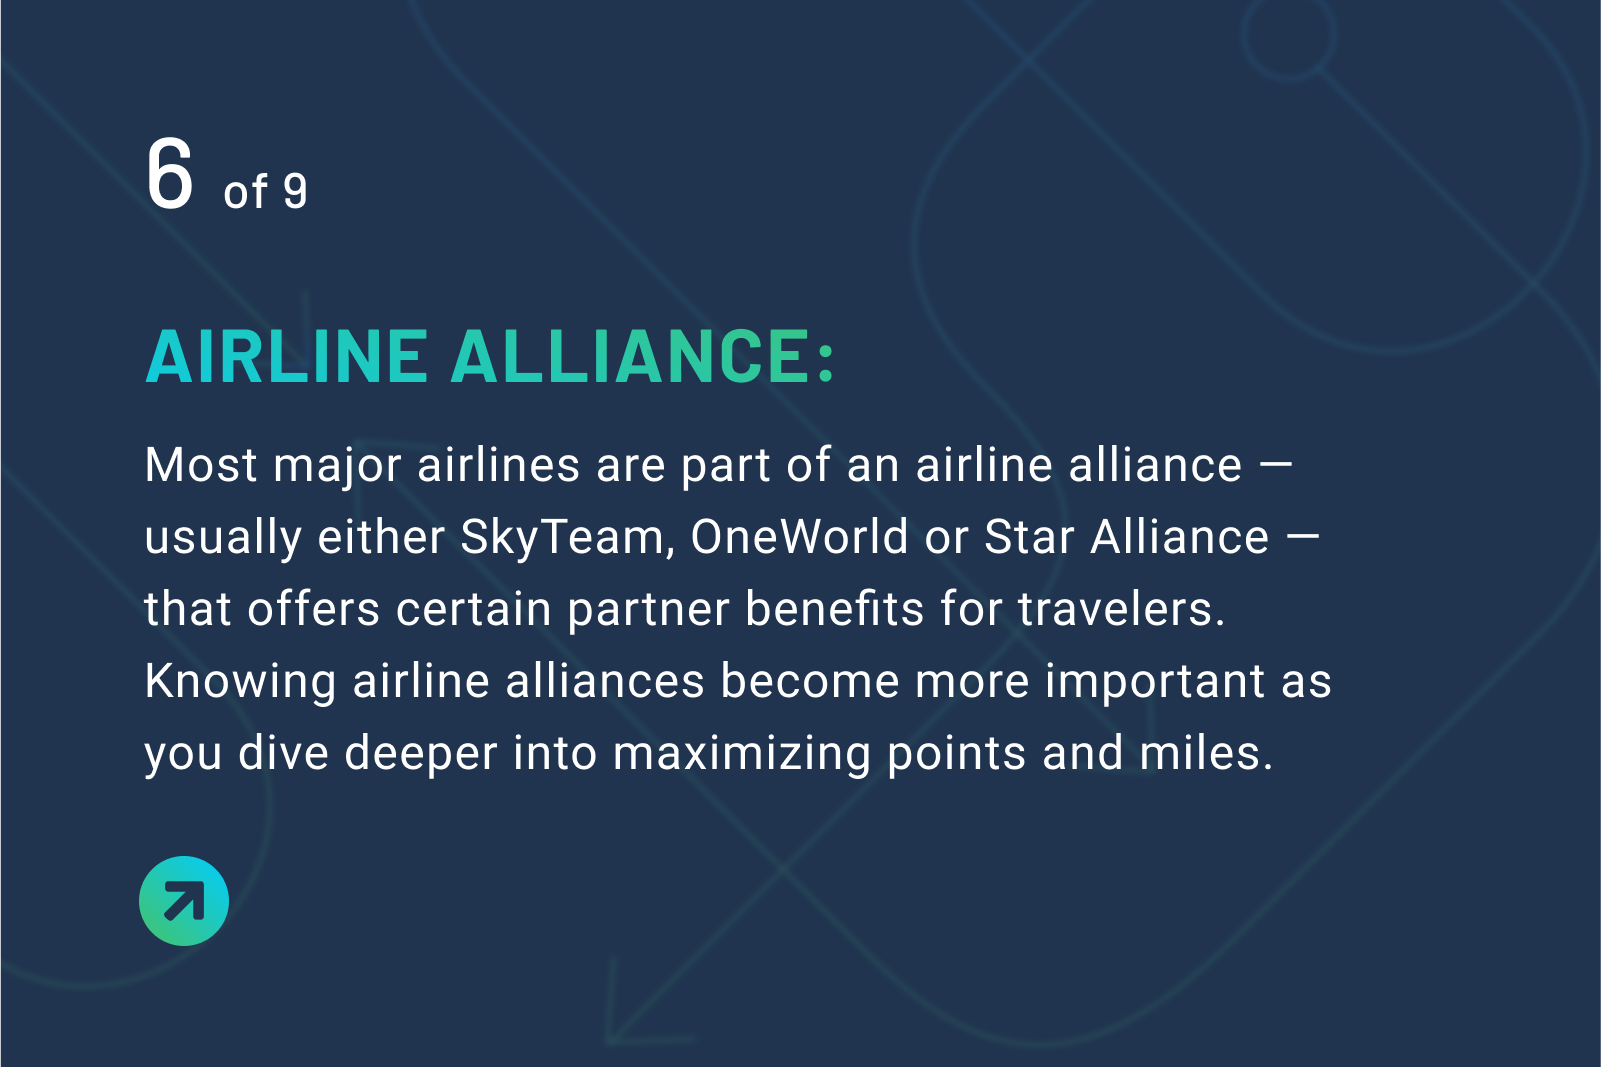 Airline alliance definition: Most major airlines are part of an airline alliance — usually either SkyTeam, OneWorld or Star Alliance — that offers certain partner benefits for travelers. Knowing airline alliances become more important as you dive deeper into maximizing points and miles.